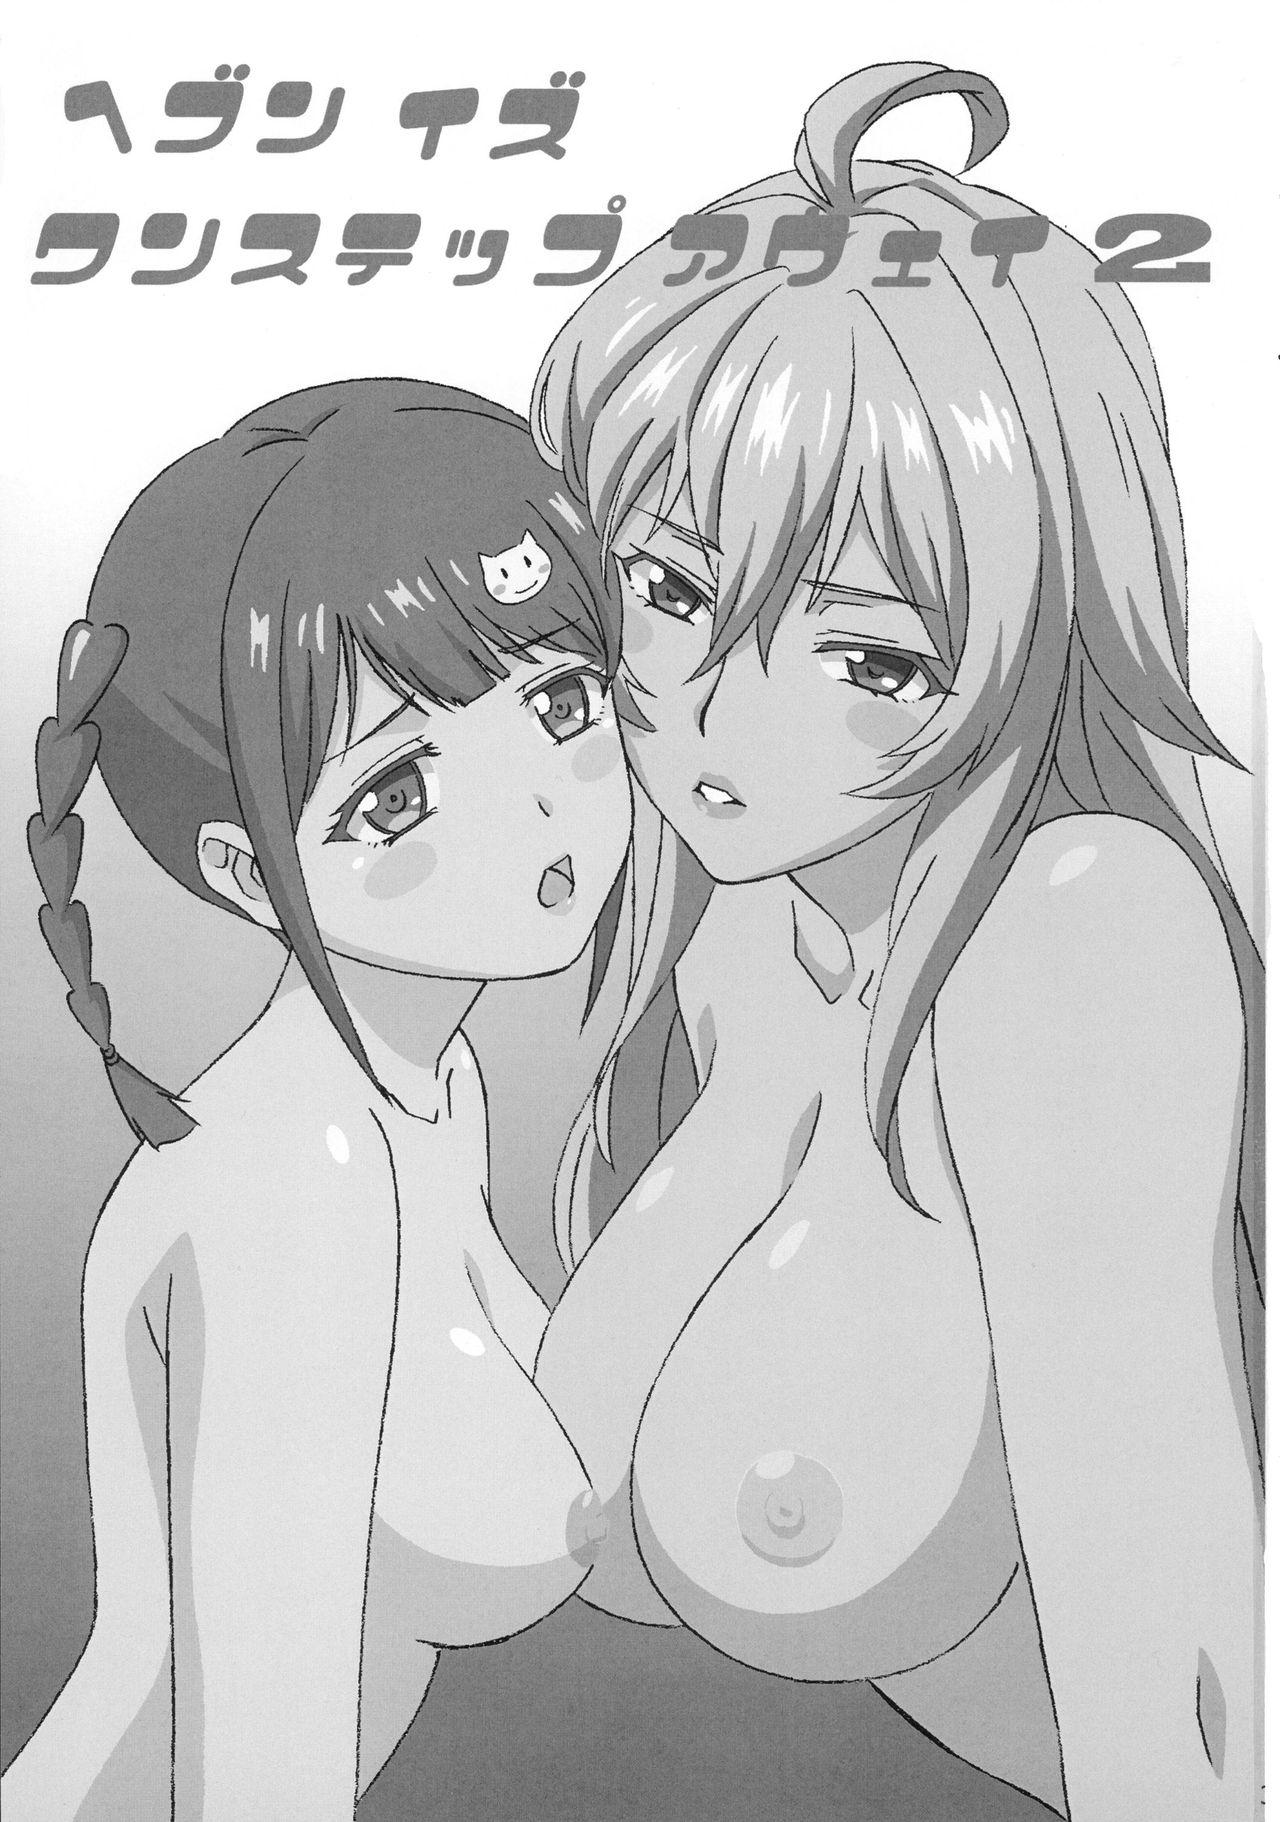 Spy Heaven is one step away 2 - Valkyrie drive Sucks - Page 3